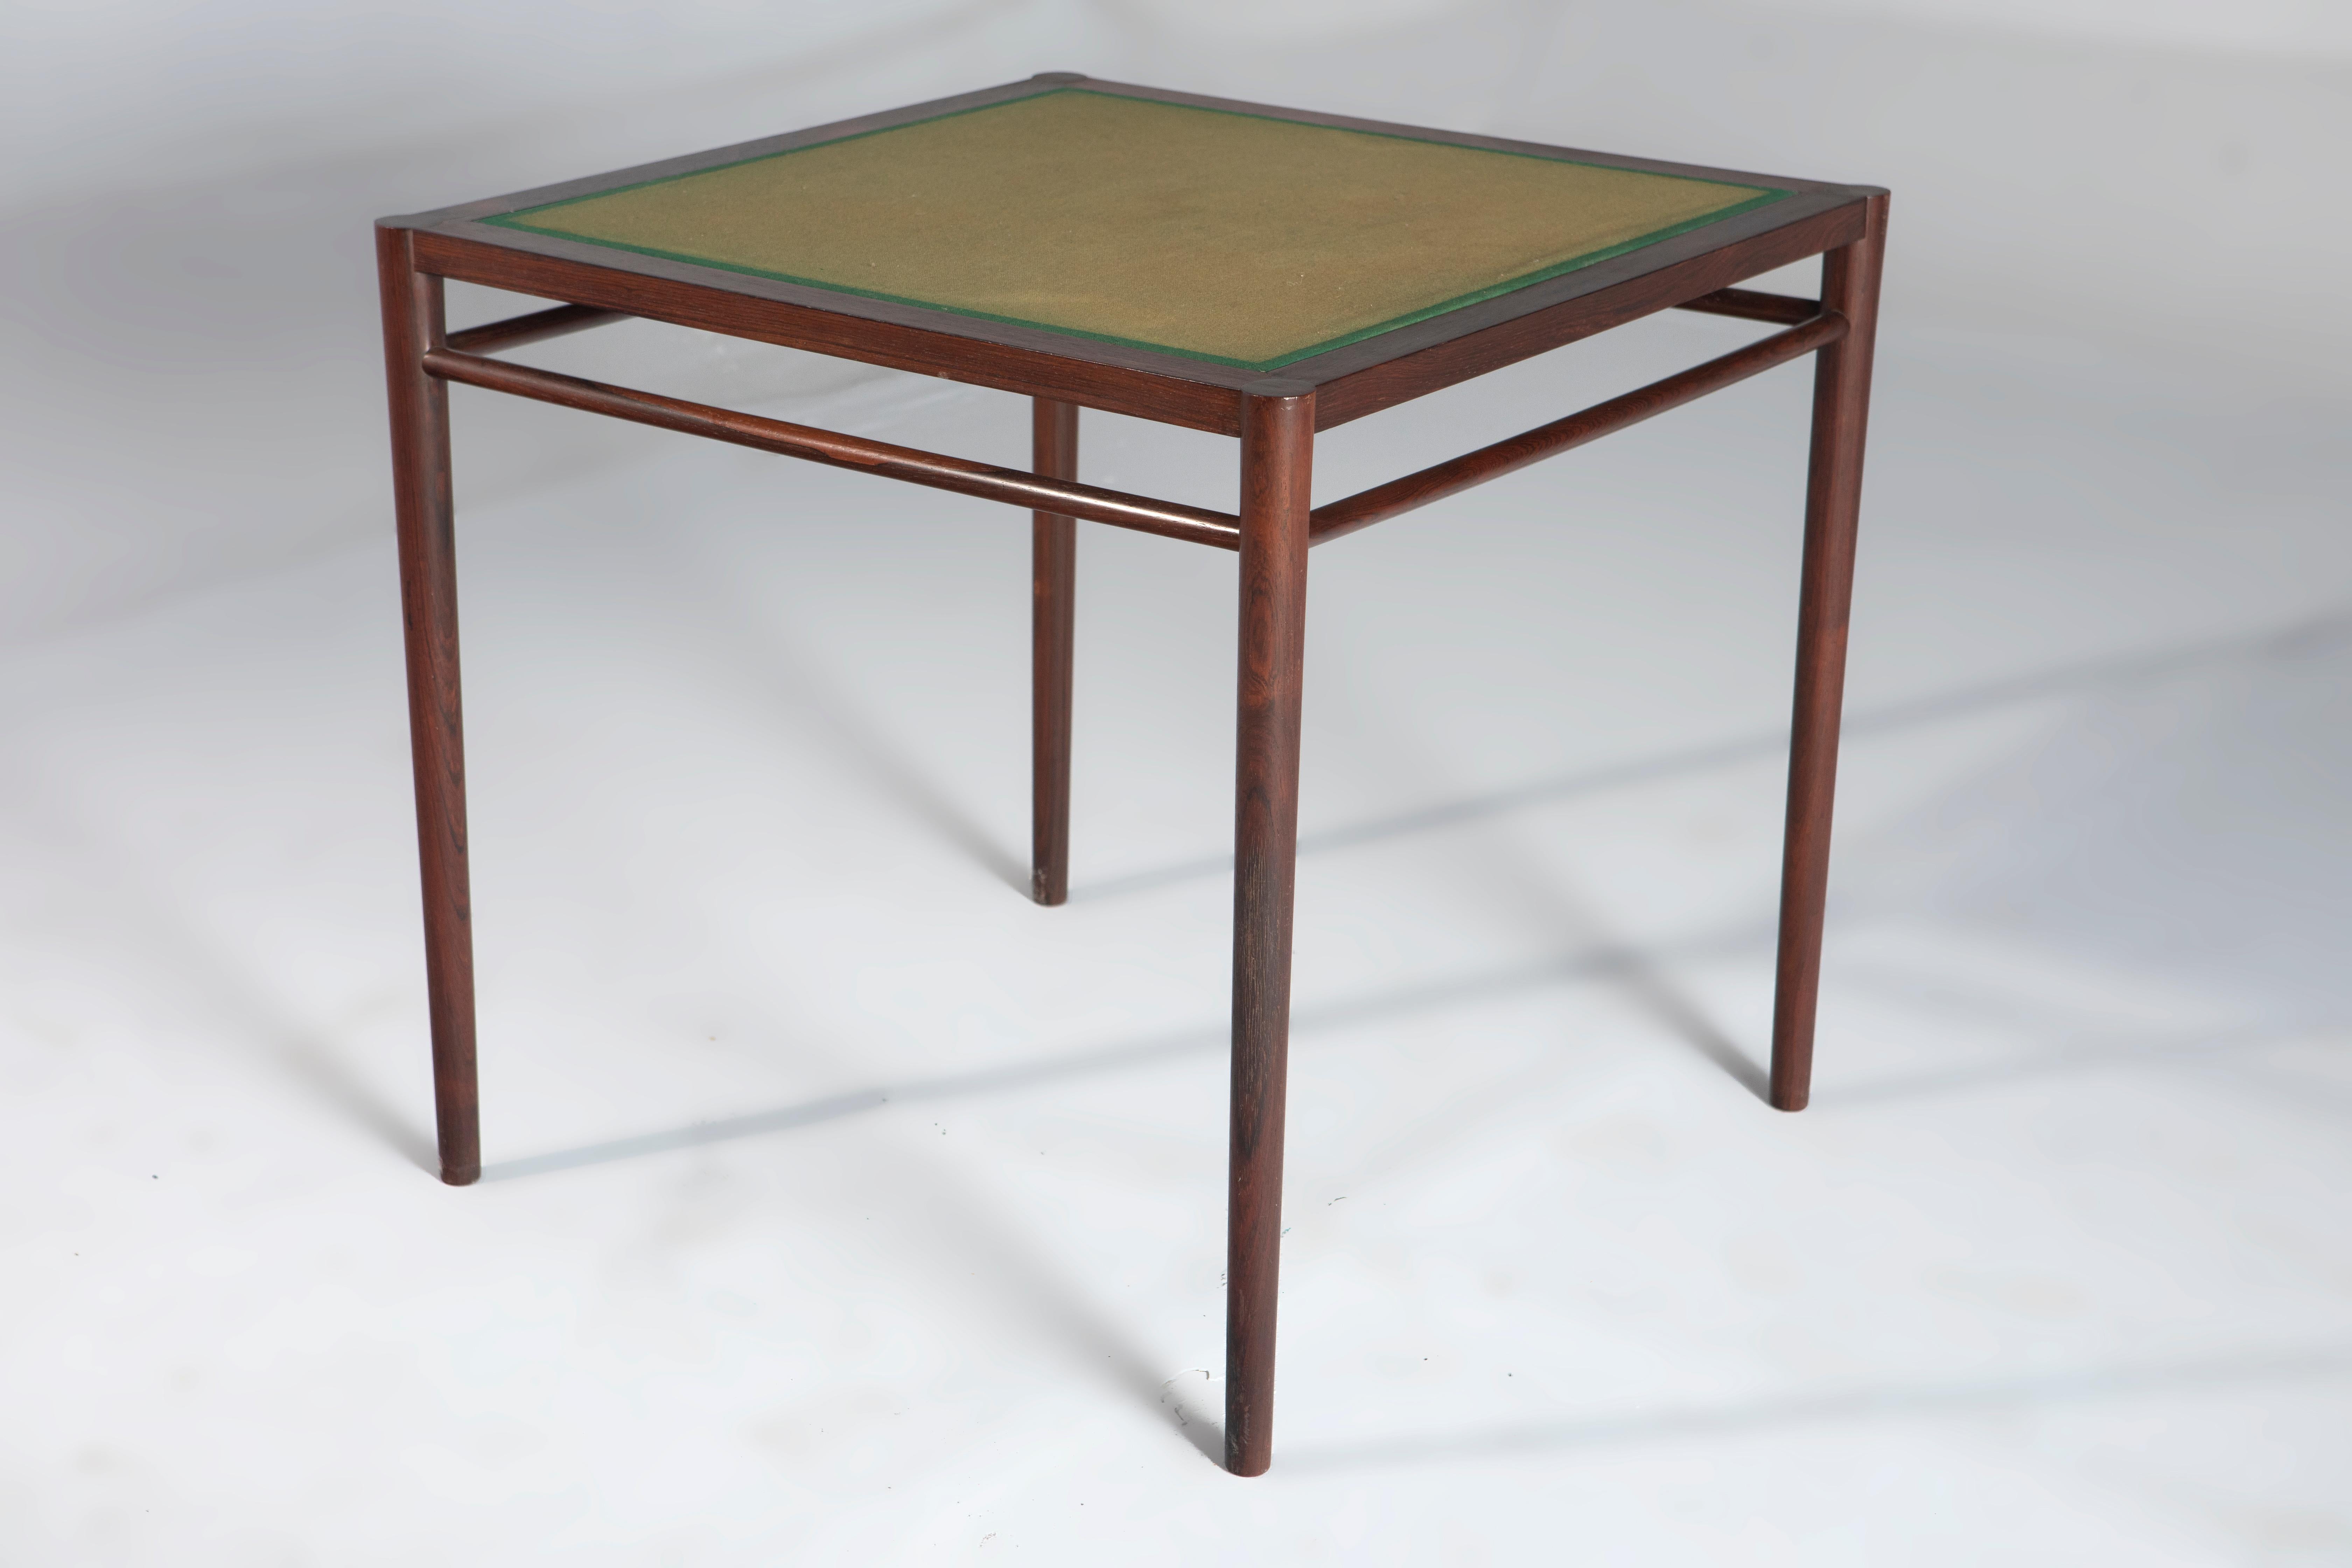 Mid-Century Modern Game Table by Mobília Contemporânea, 1960s

Square game table, made around the 1960s by the Brazilian manufacture Mobília Contemporânea.
It has a solid wood structure with a fabric top.